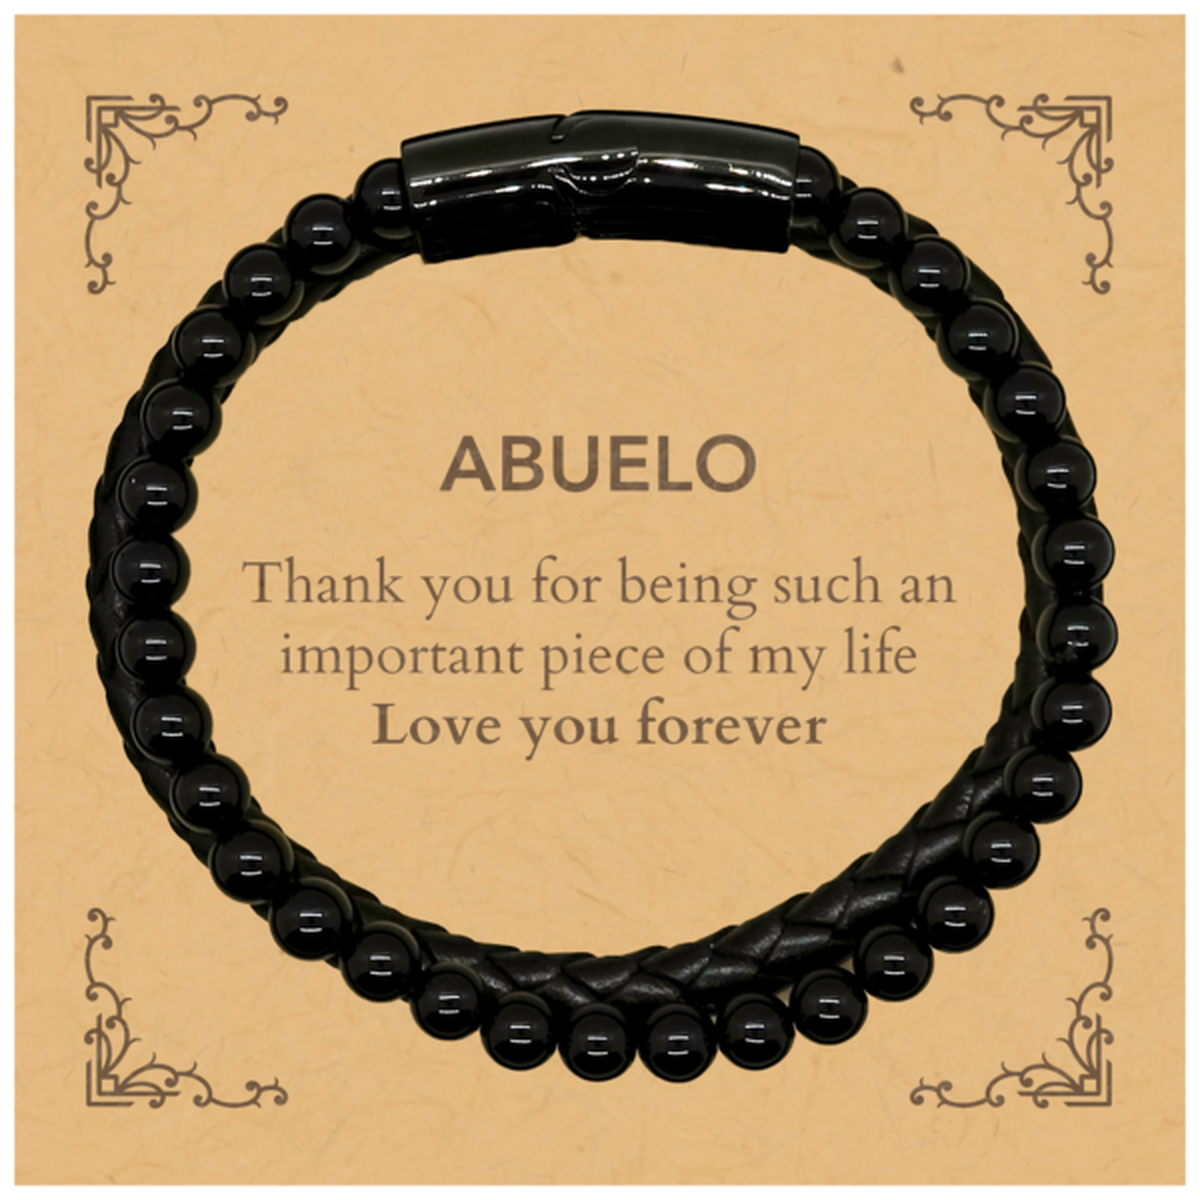 Appropriate Abuelo Stone Leather Bracelets Epic Birthday Gifts for Abuelo Thank you for being such an important piece of my life Abuelo Christmas Mothers Fathers Day